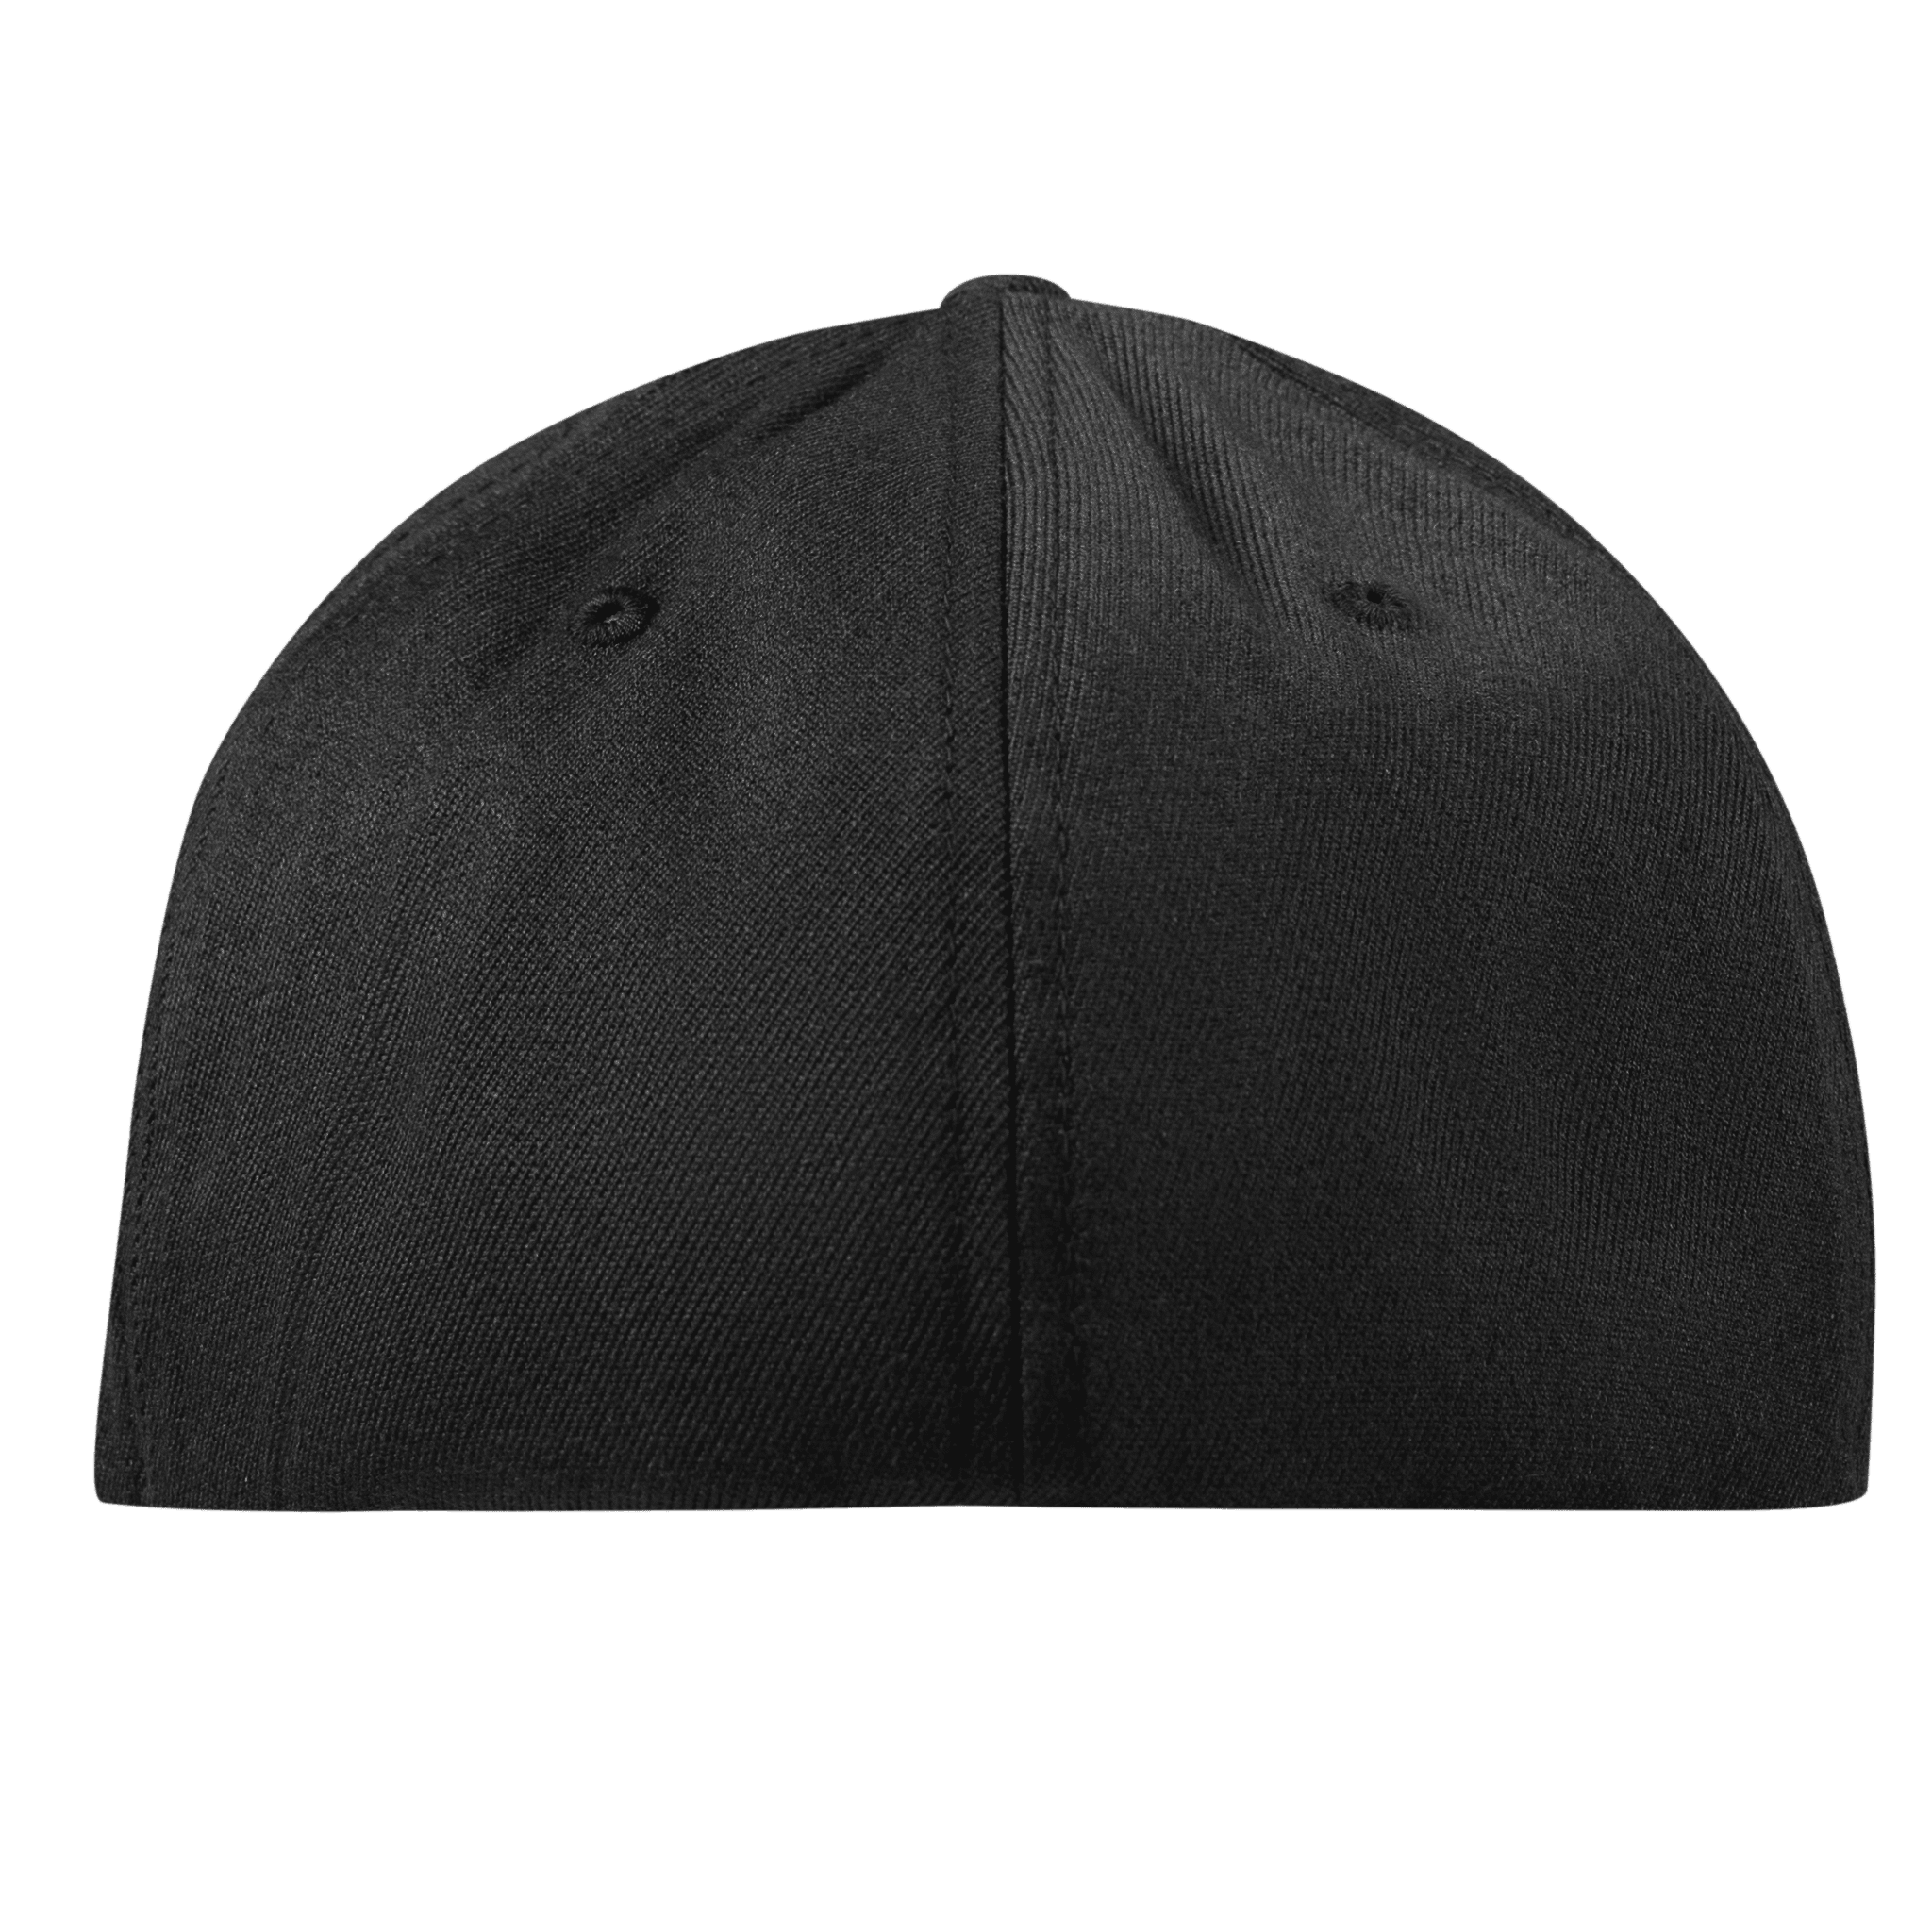 Indiana 19 Flexfit Fitted Back Black